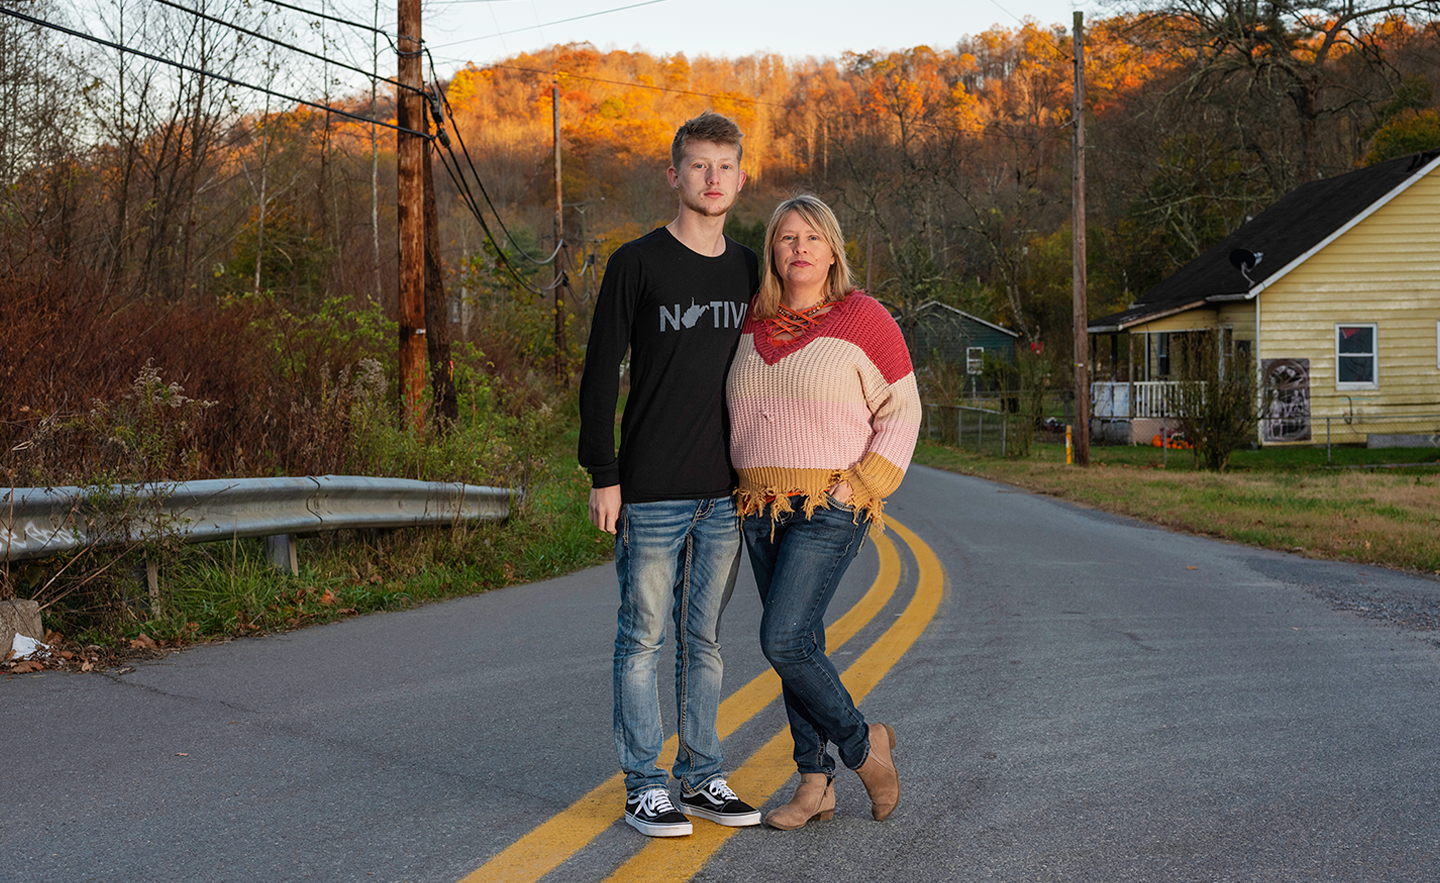 Men's Health: Around 80% of lifelong residents get cancer in this WV town